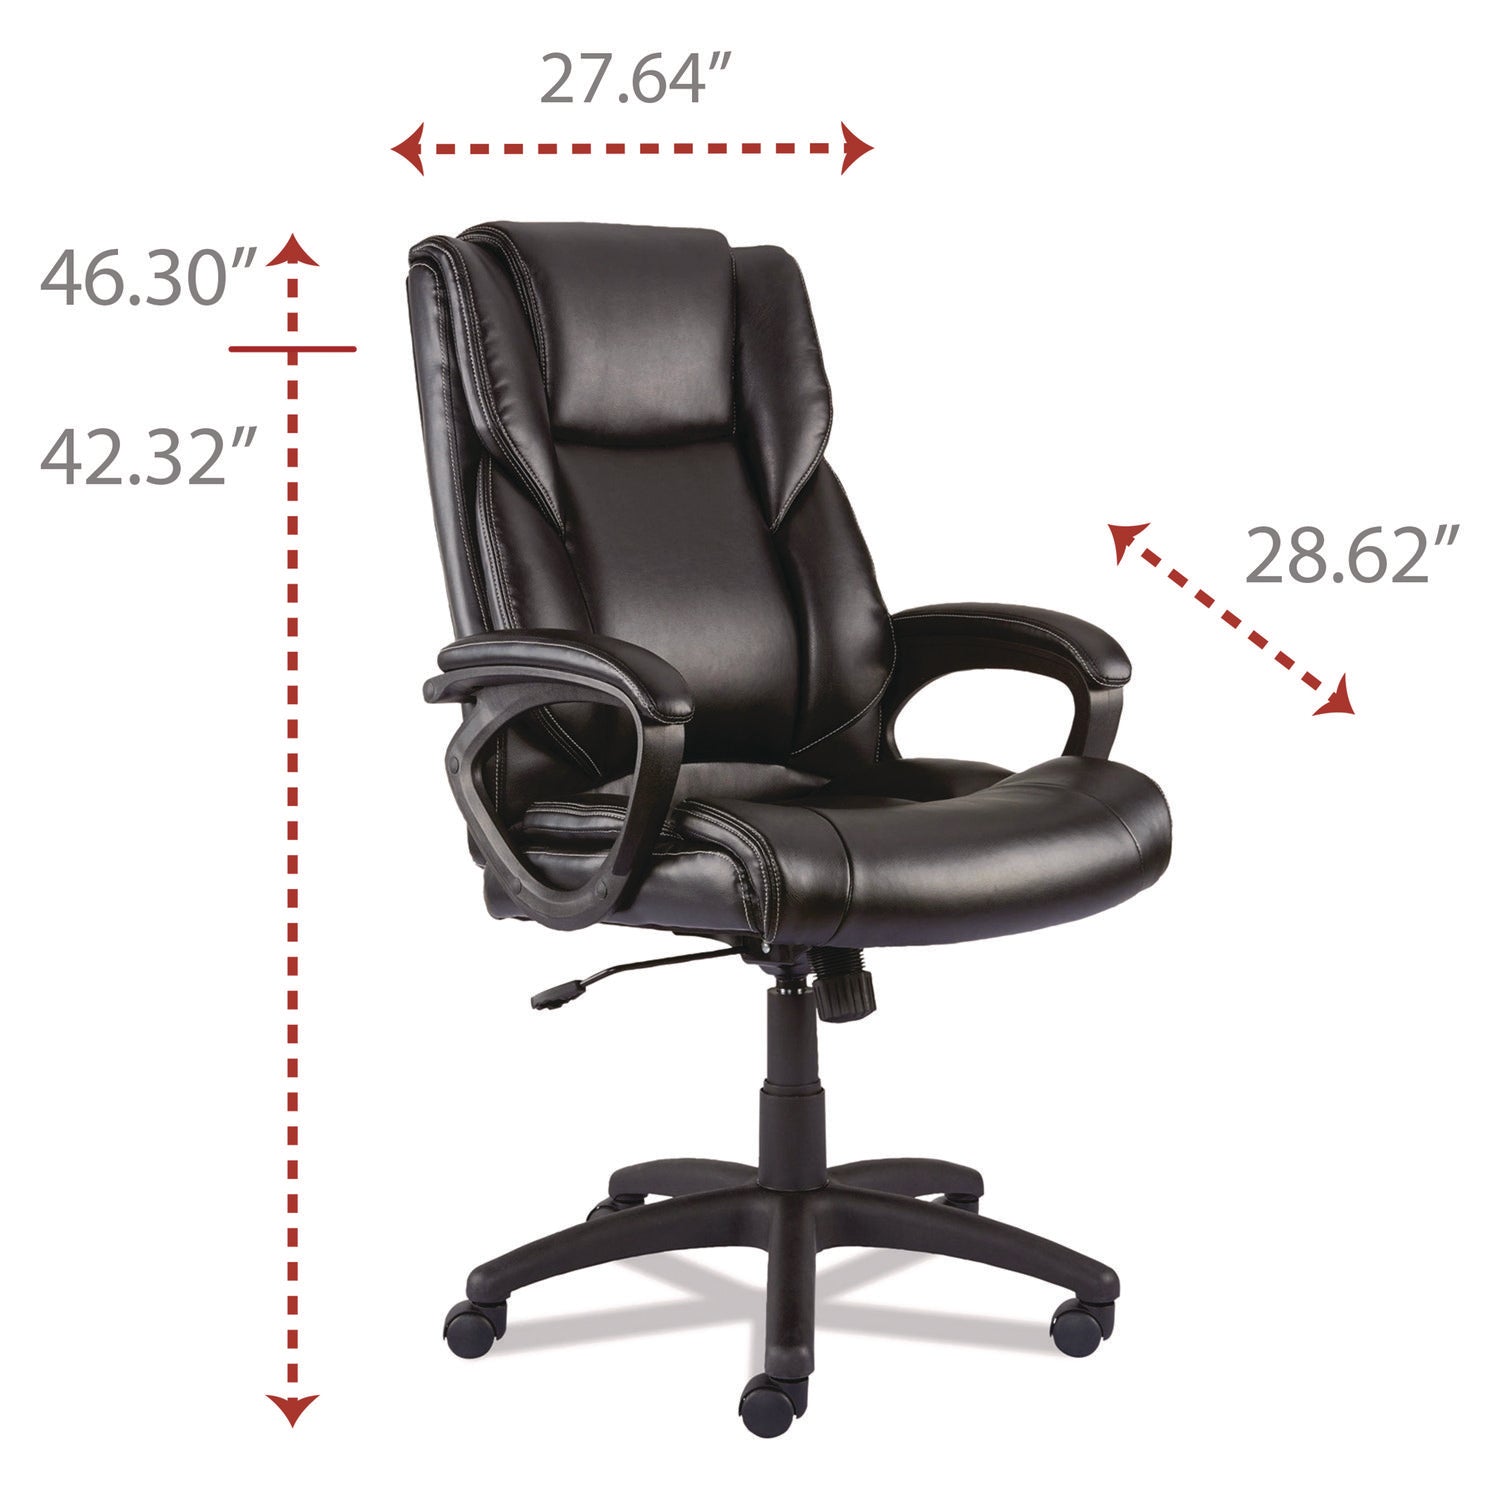 Alera Brosna Series Mid-Back Task Chair, Supports Up to 250 lb, 18.15" to 21.77 Seat Height, Black Seat/Back, Black Base - 6